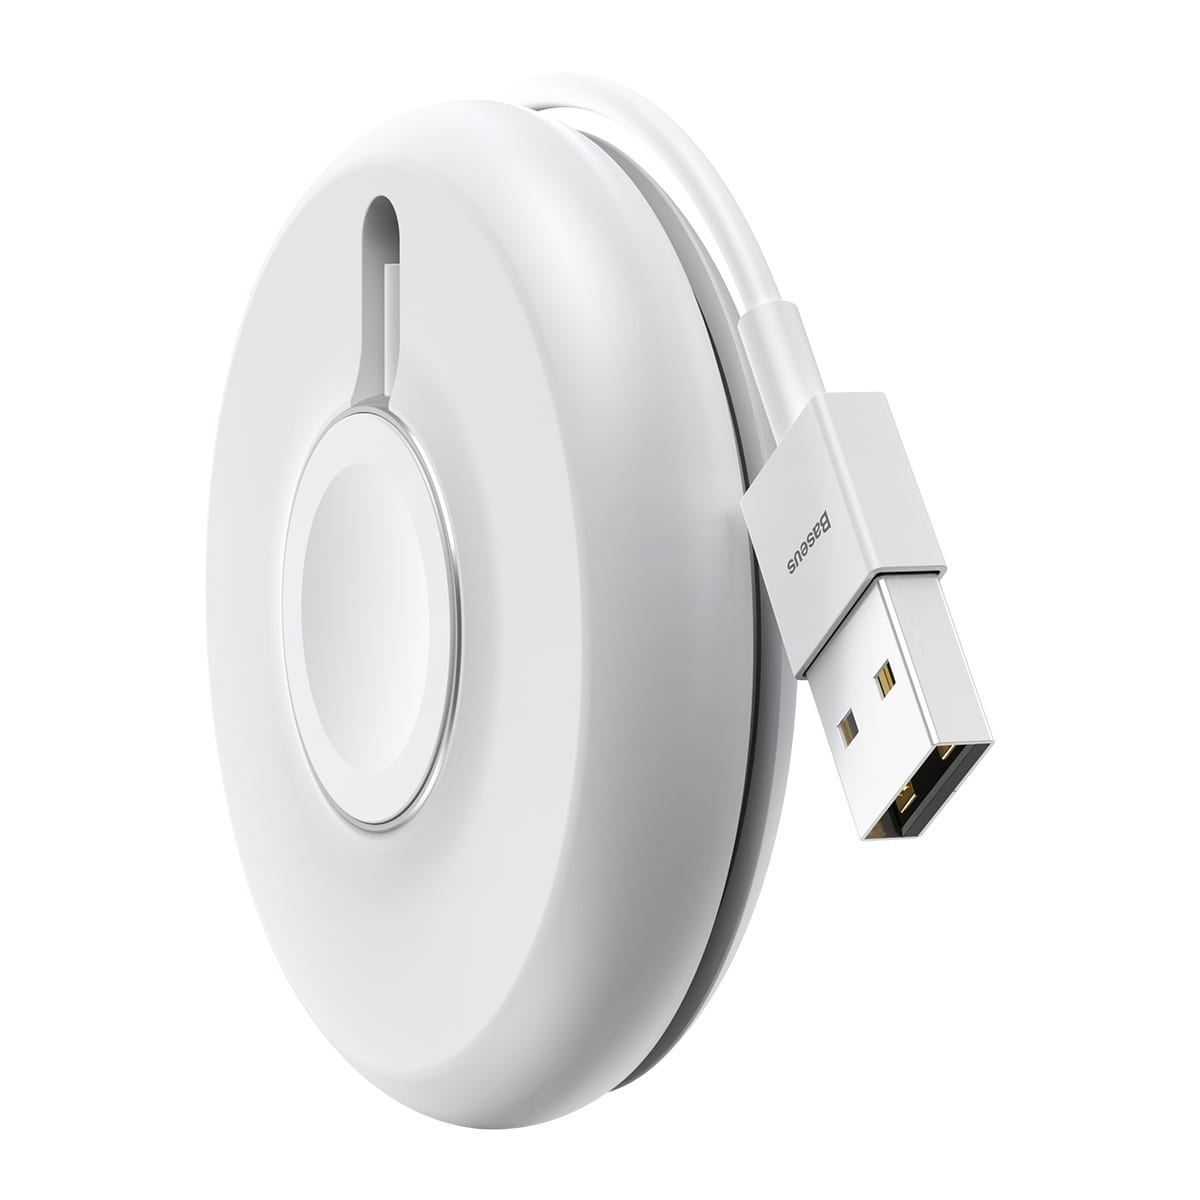 Baseus-YOYO-Wireless-Charger-for-iWatch_Accessories_11757_1-2